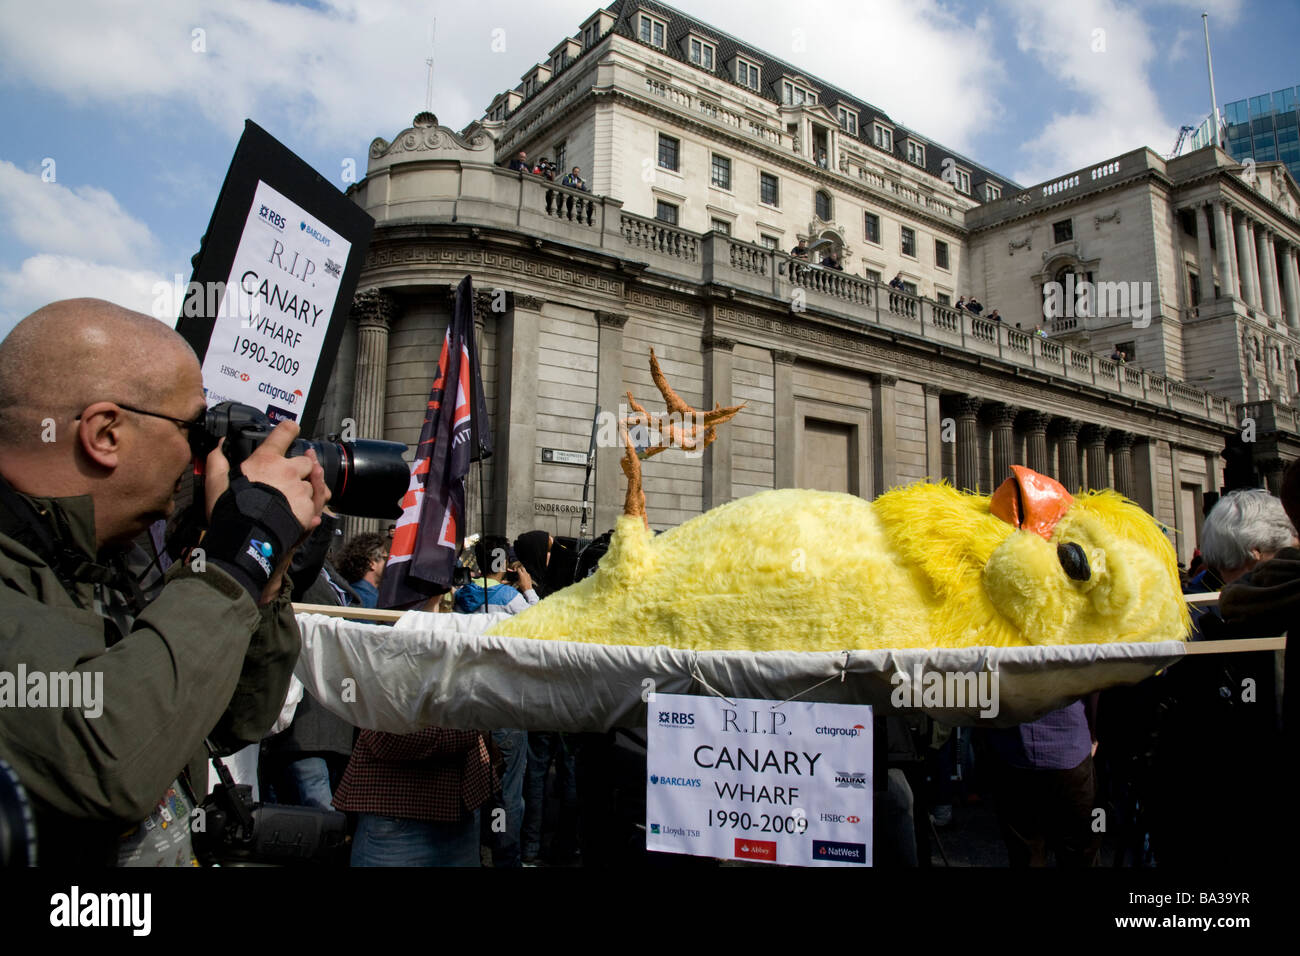 Demonstrators carry a bird on a stretcher illustrating recession at Canary Wharf, at the Bank of England during G20 protest Stock Photo